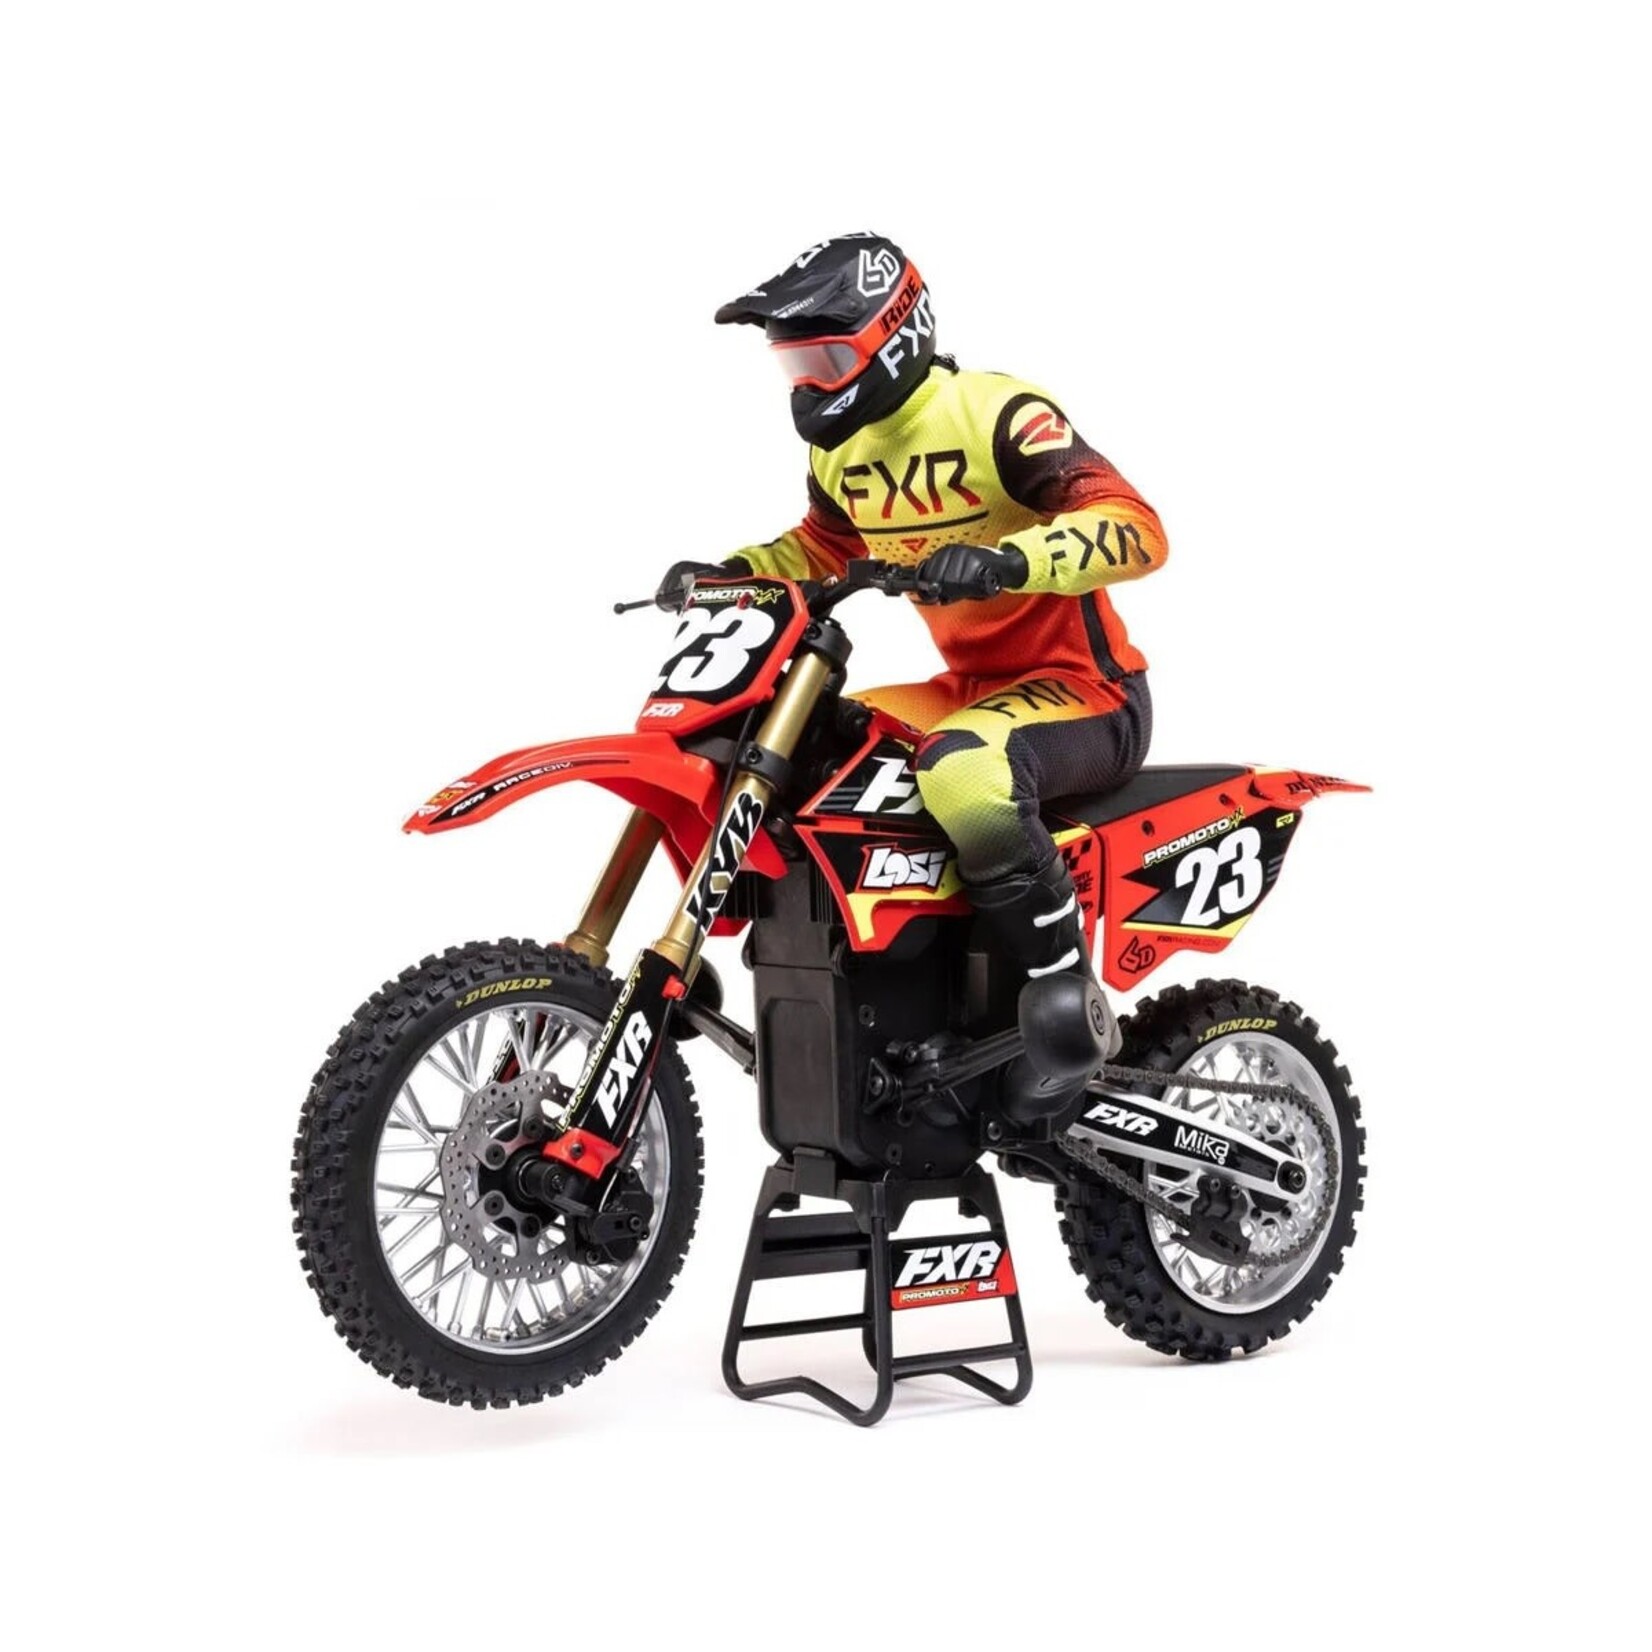 Losi Losi Promoto-MX RTR 1/4 Brushless Motorcycle (FXR) w/2.4GHz DX3PM Radio & MS6X System #LOS06000T1